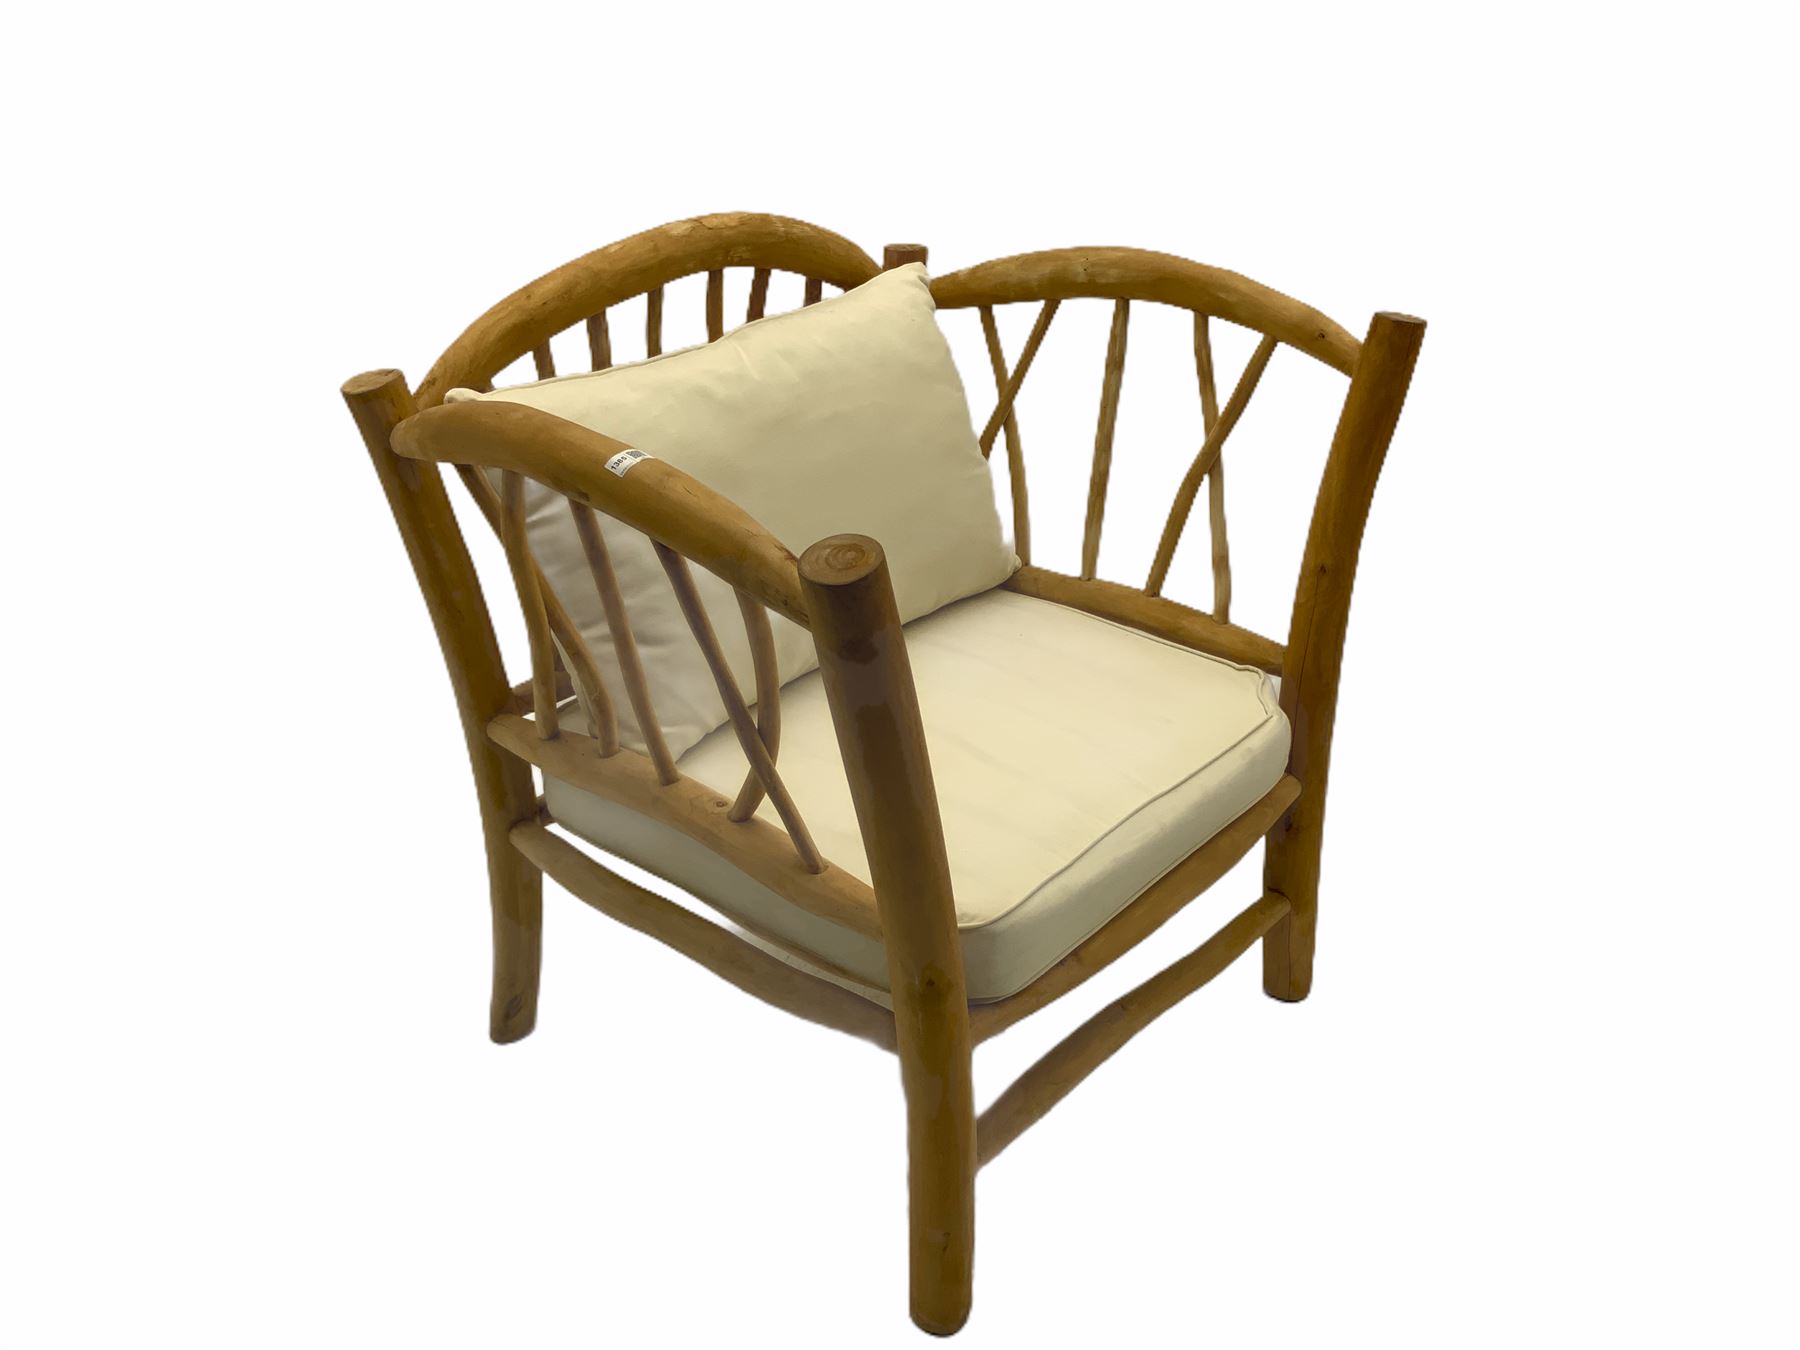 Rustic wood seat with loose cream cushions - Image 2 of 2